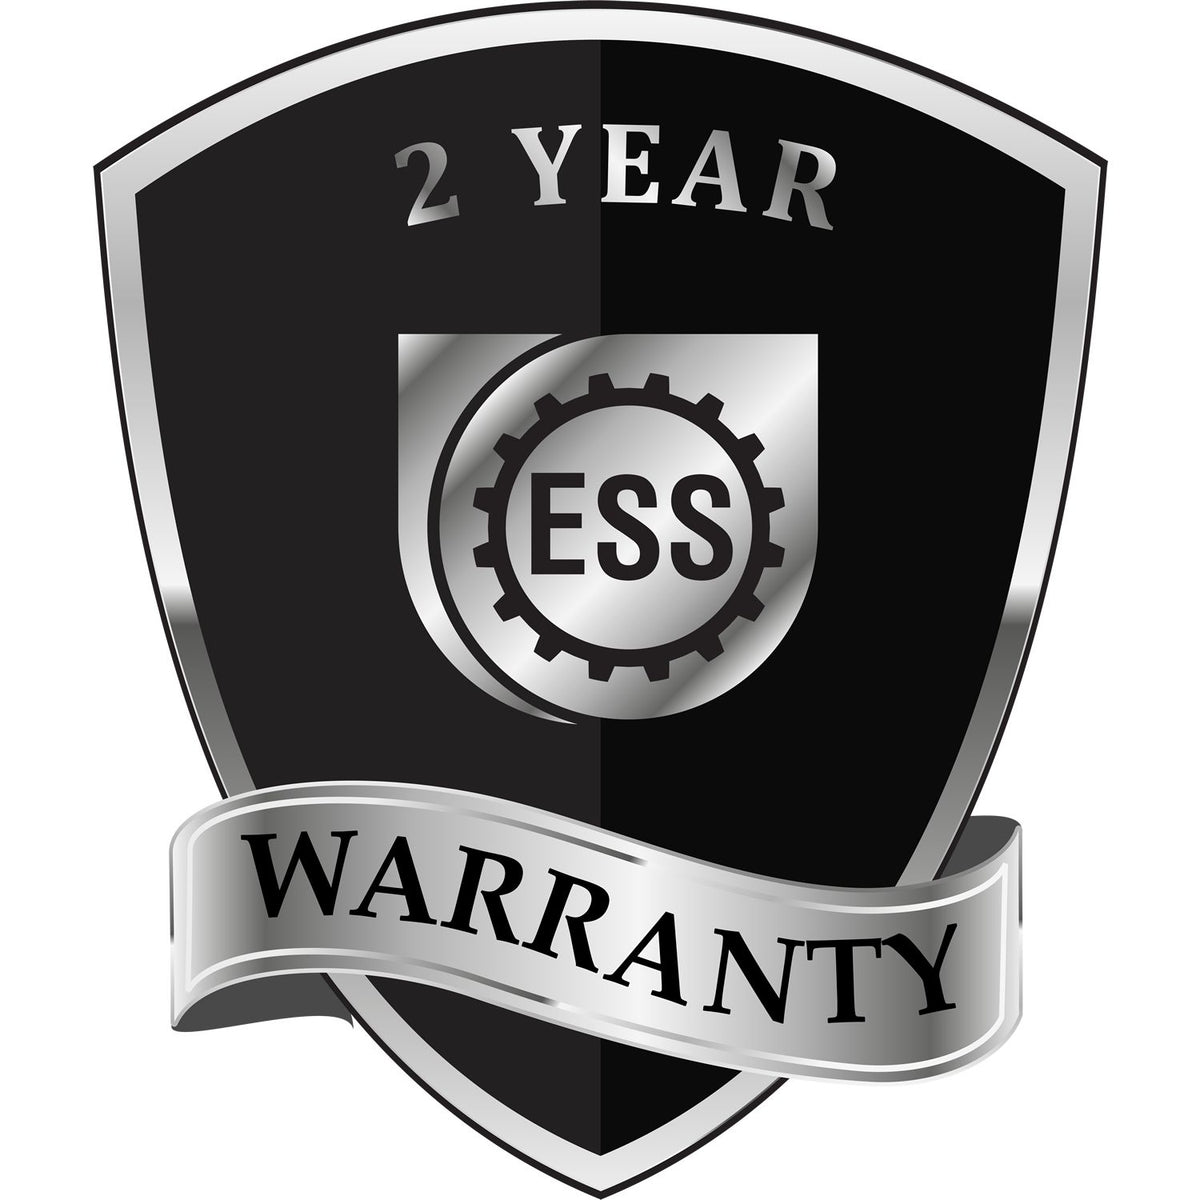 A badge or emblem showing a warranty icon for the Pennsylvania Engineer Desk Seal